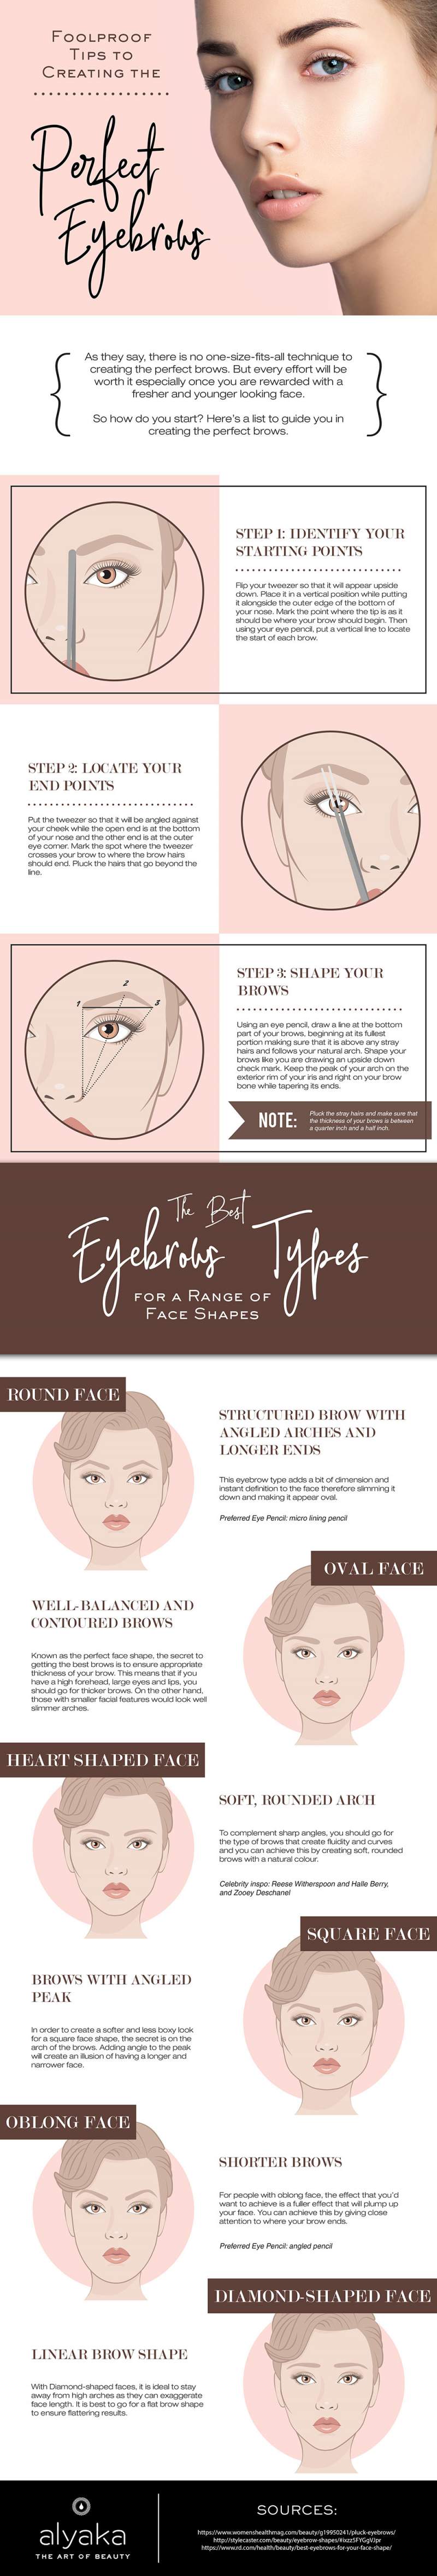 eyebrow types and shapes